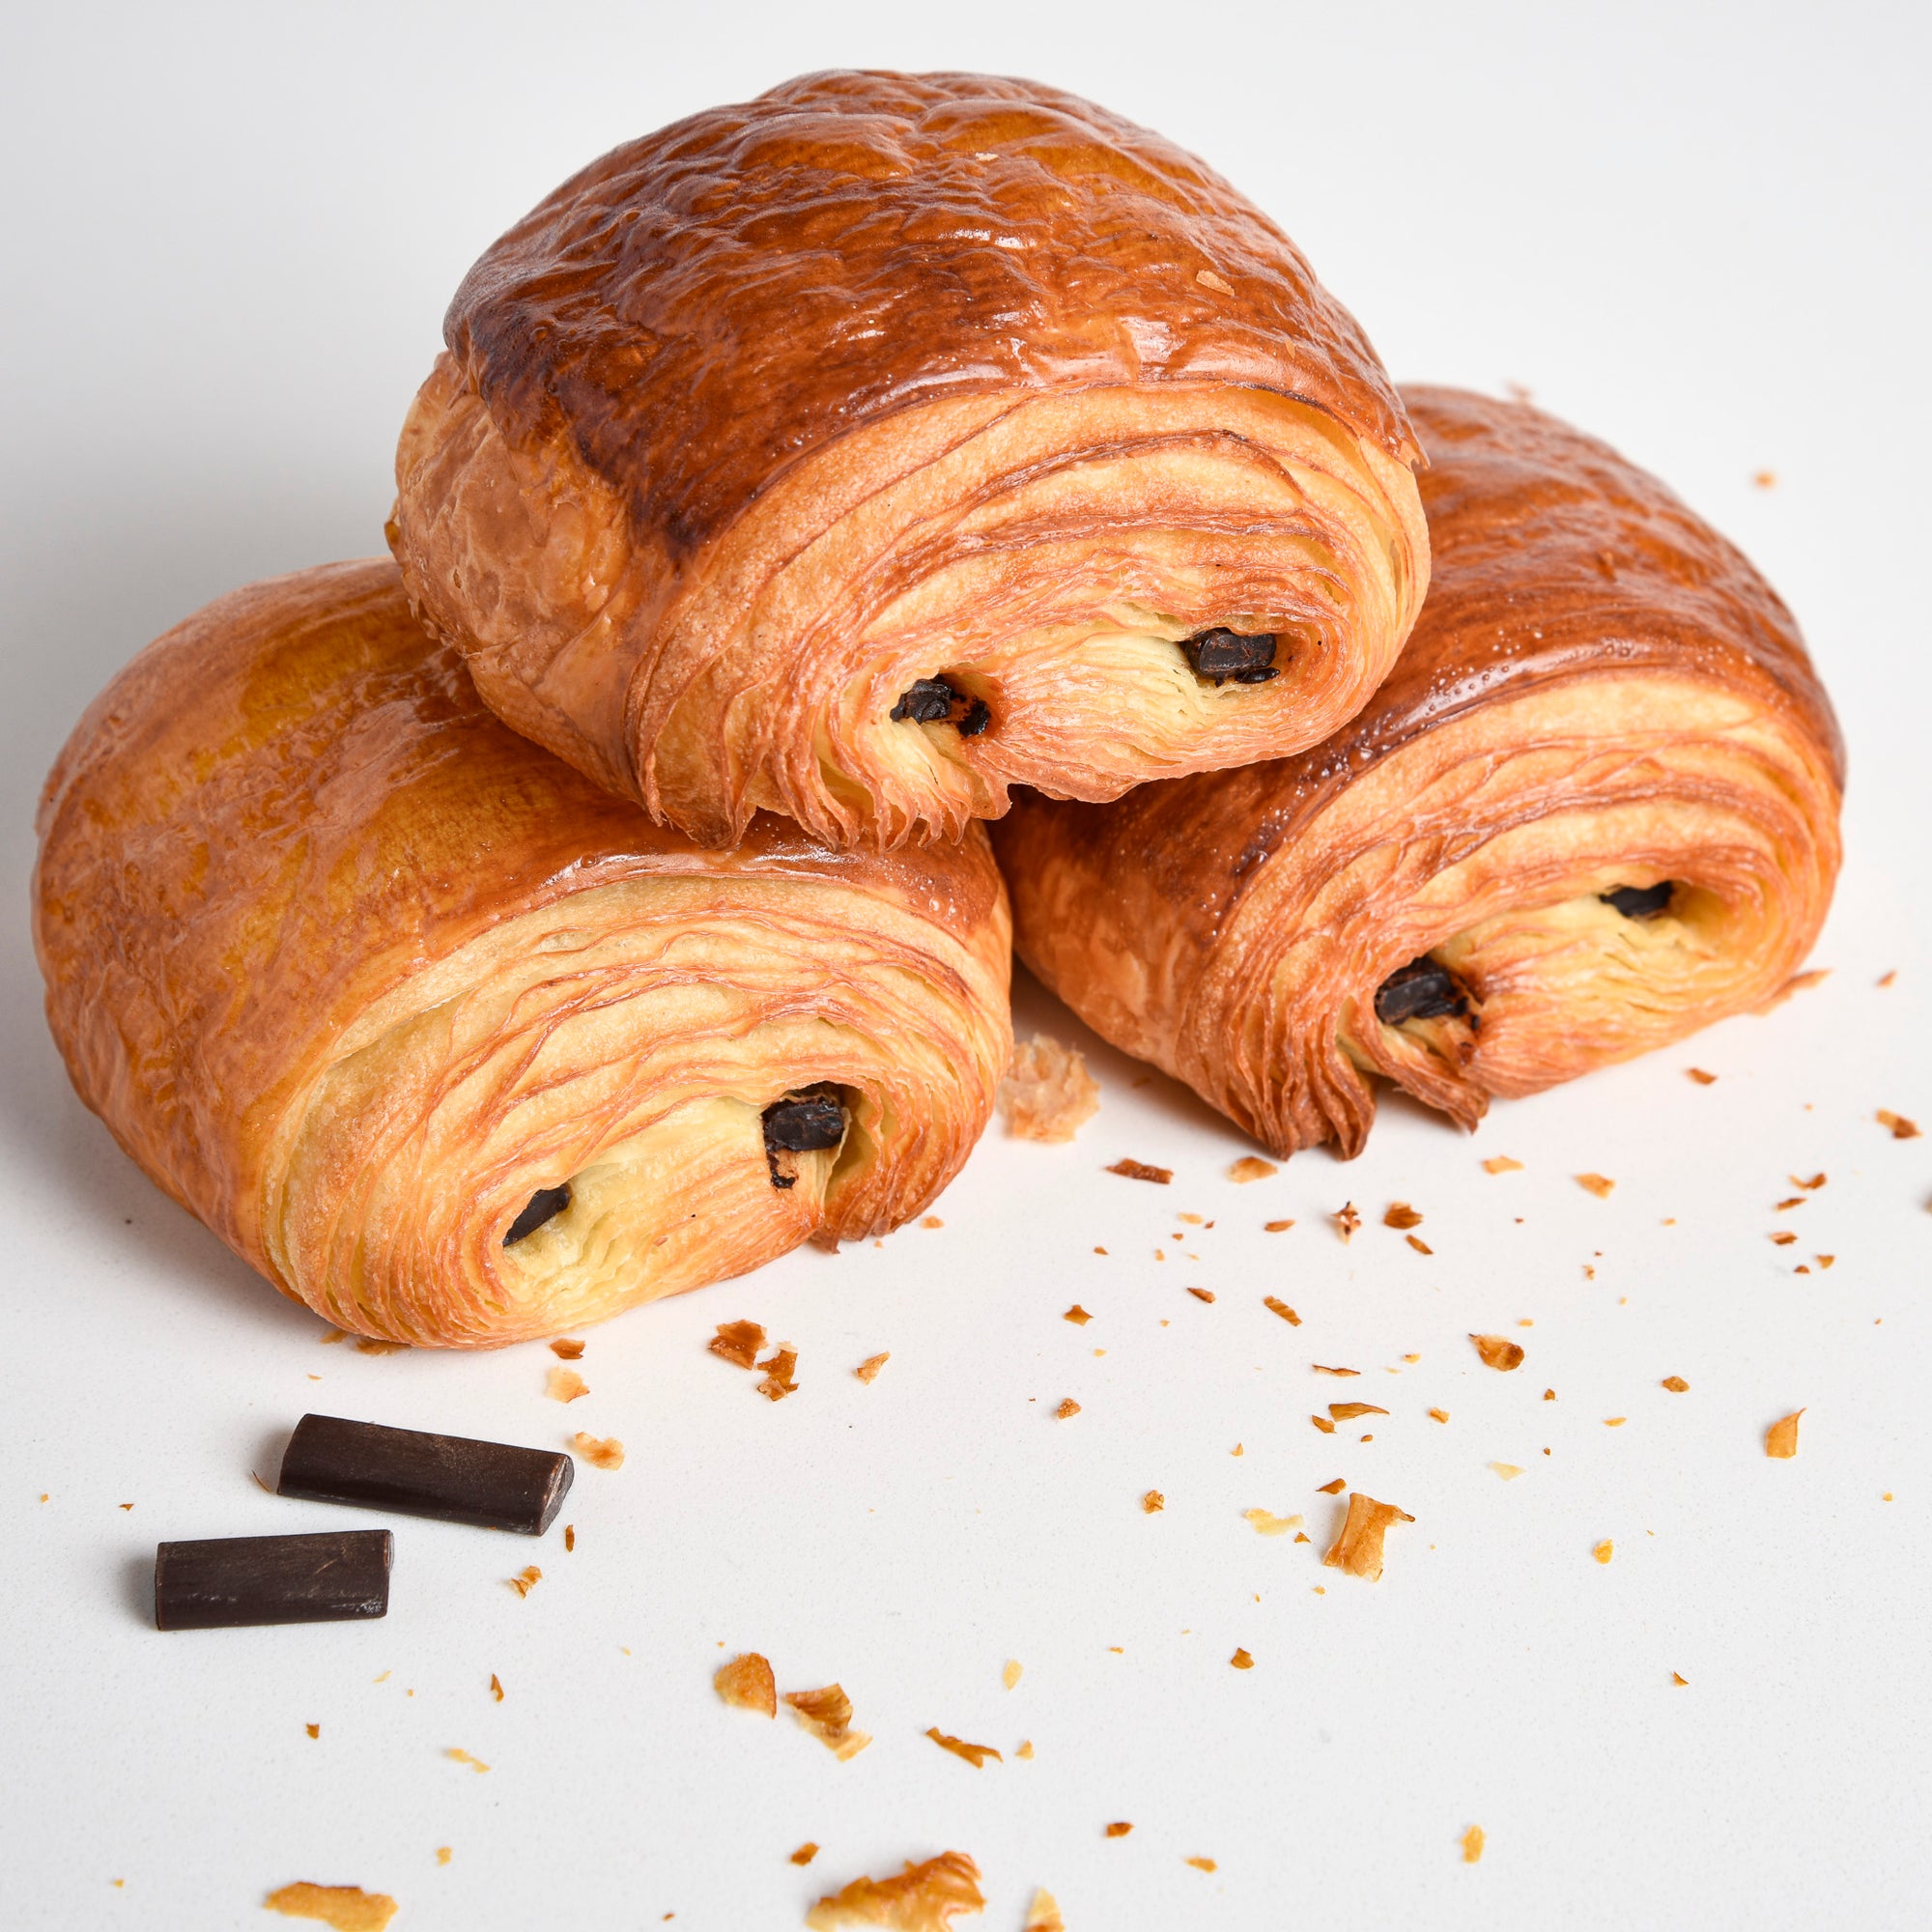 Le fournil bakery croissants filled with Valrhona chocolate sticks